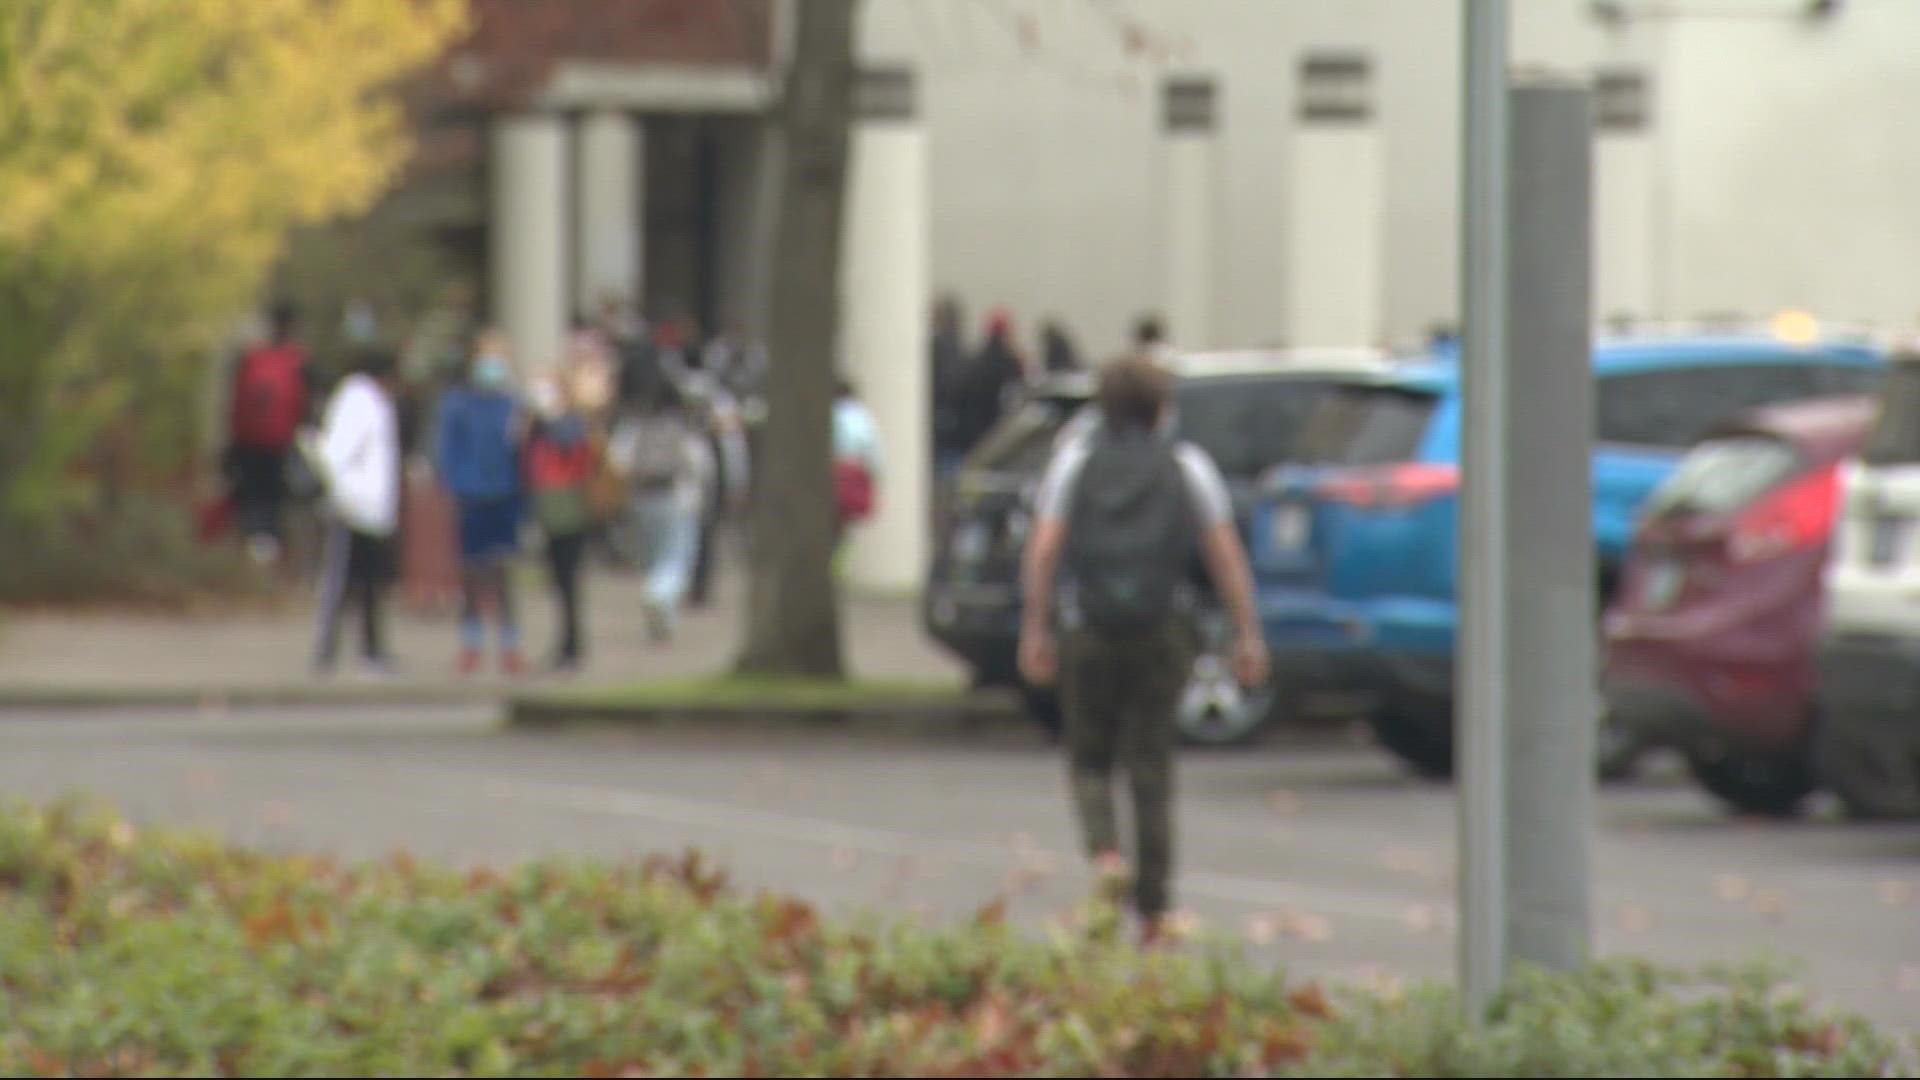 KGW’s Christine Pitawanich checked in to see what school districts around Oregon were doing policy-wise in the wake of the omicron wave.